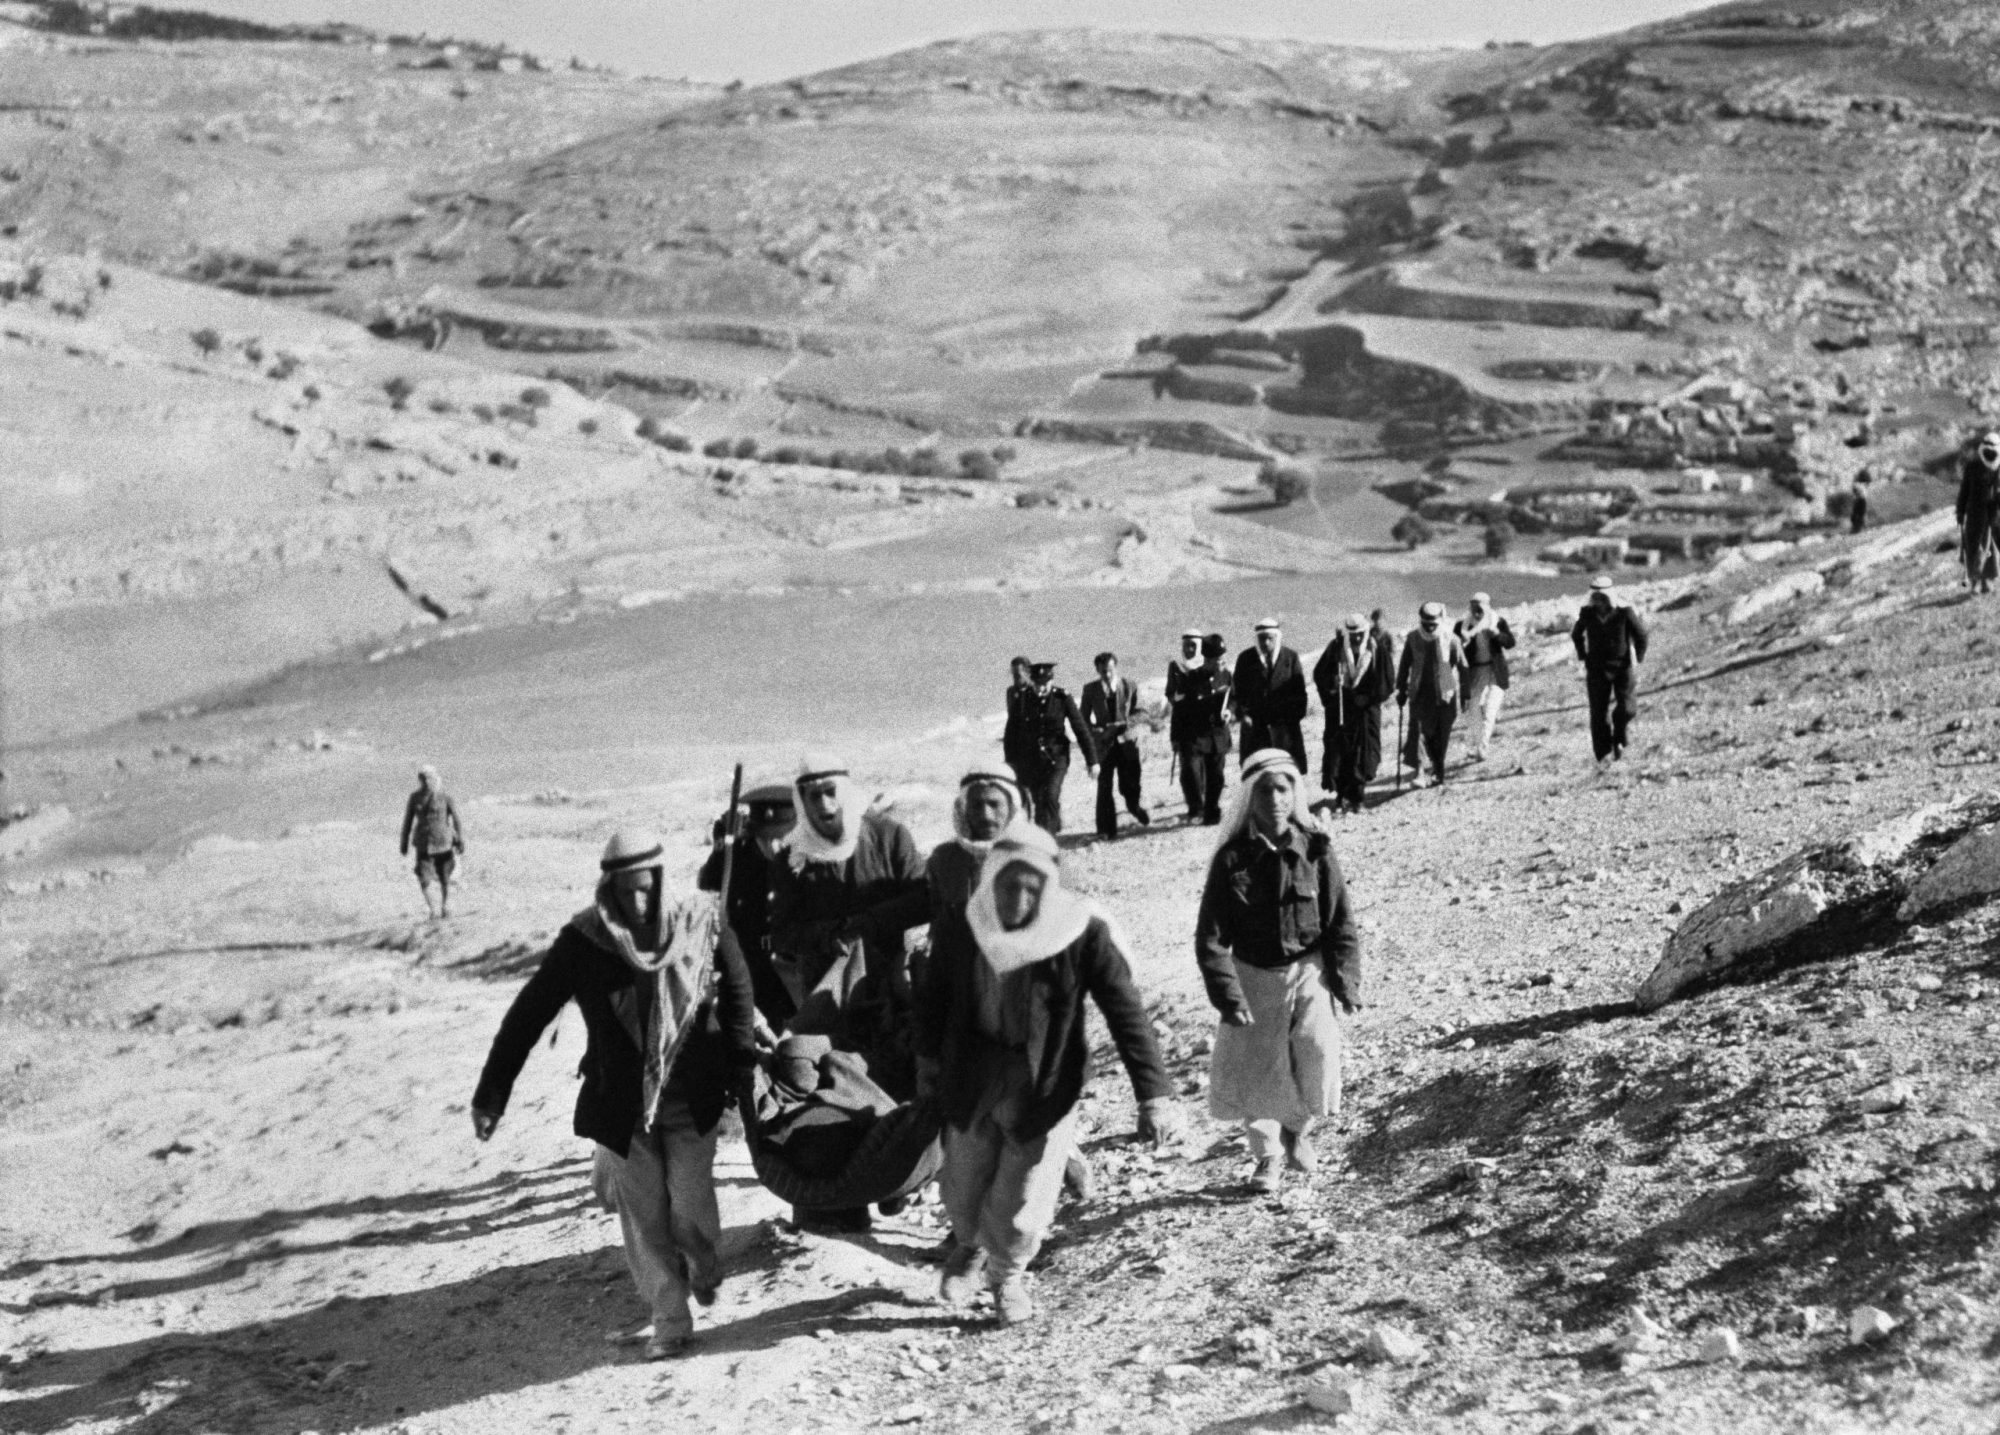 Picture released in January 1948 shows Palestinian Arabs leaving their village and neighborhoods of Jerusalem to march against a Jewish settlement in Palestine and fleeing the Haganah attack, during the 1948 ArabIsraeli War. Photo by -/INTERCONTINENTALE/AFP via Getty Images